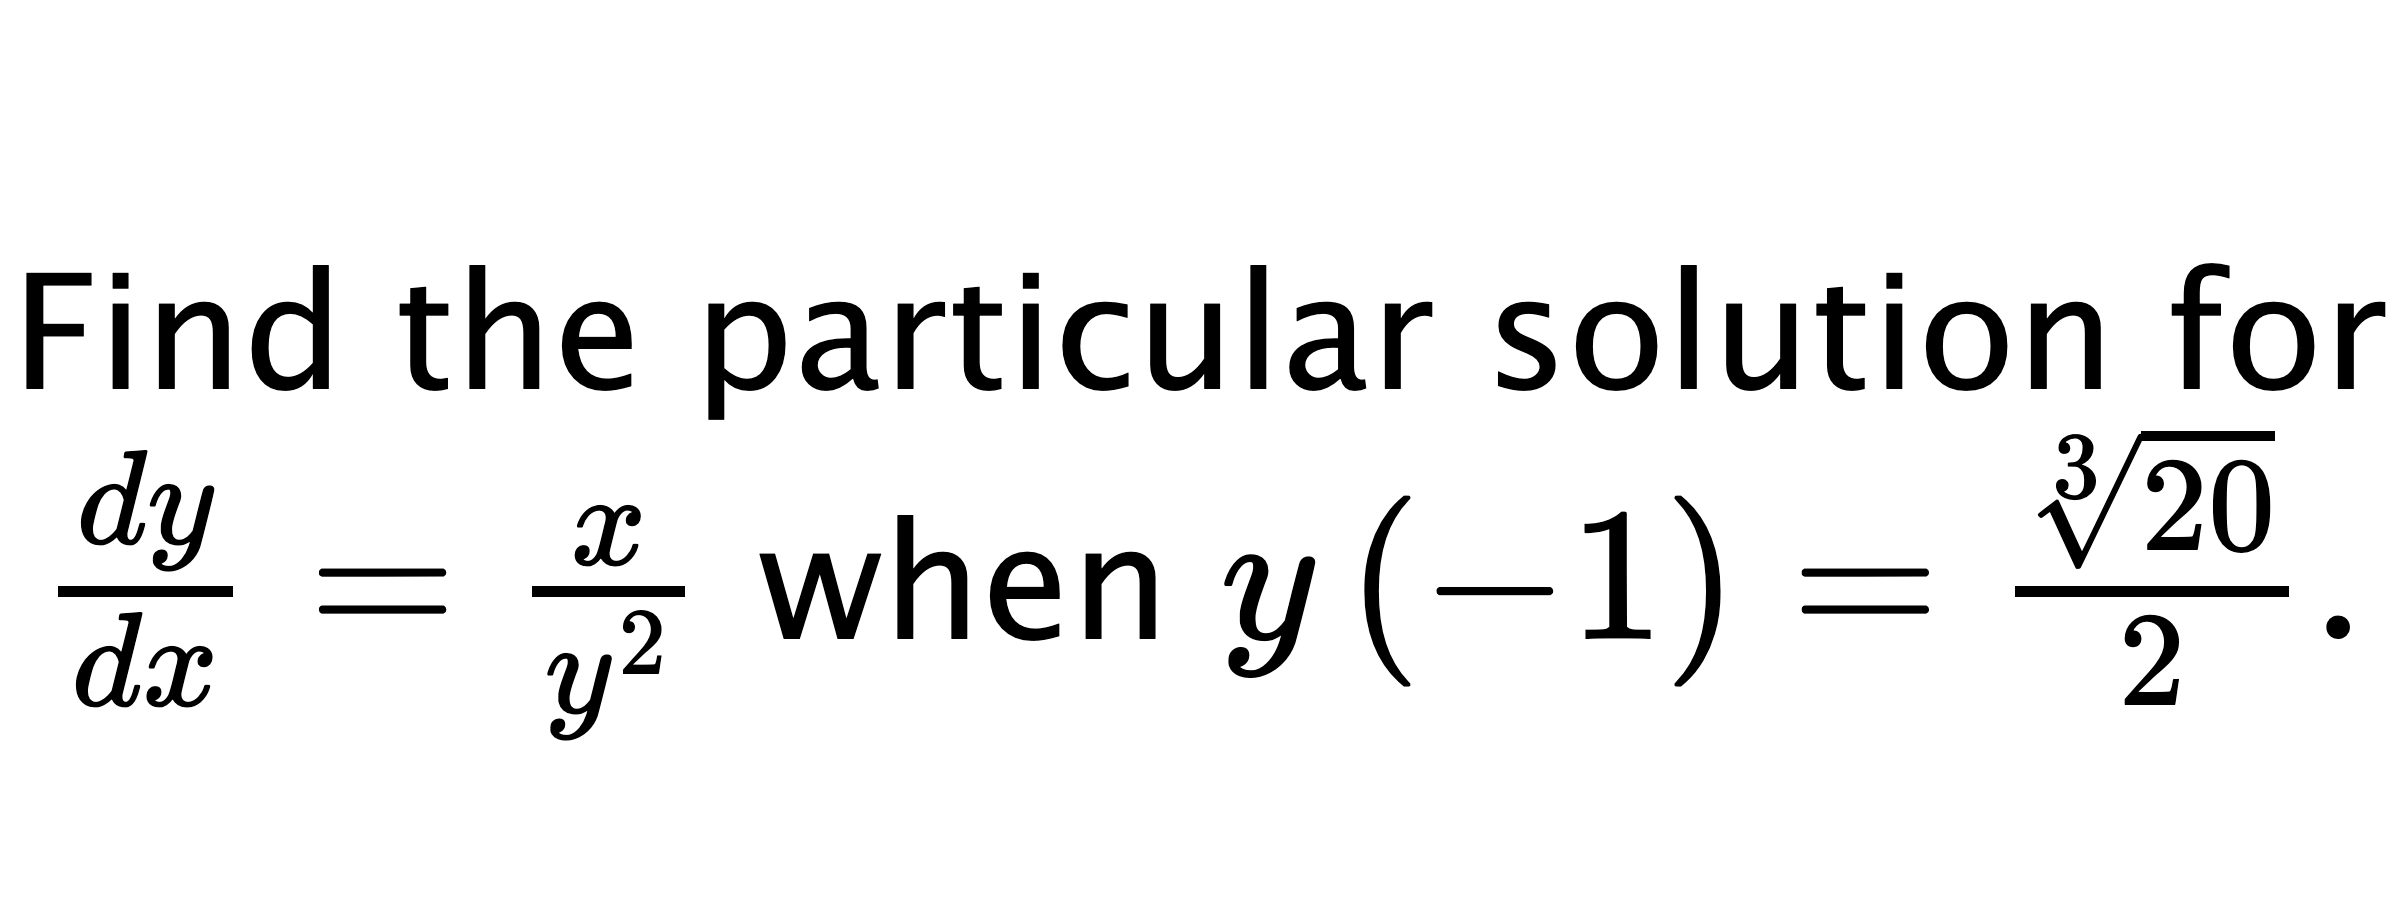  Find the particular solution for $ \frac{dy}{dx}=\frac{x}{y^{2}} $ when $ y\left( -1 \right)=\frac{\sqrt[3]{20}}{2}. $